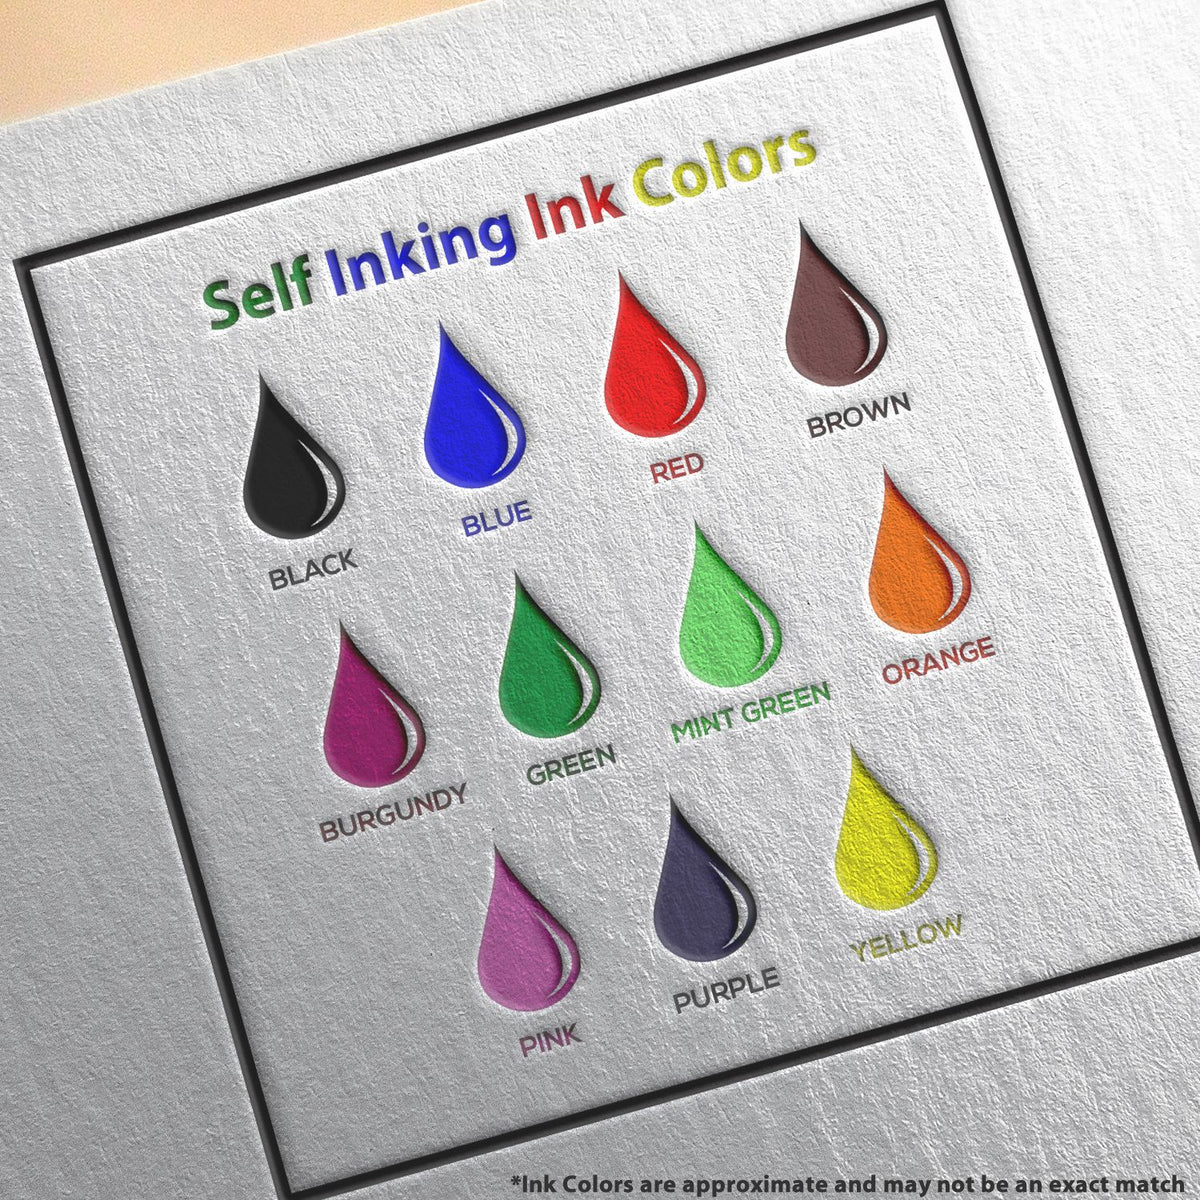 A picture showing the different ink colors or hues available for the Self-Inking Rectangular Guam Notary Stamp product.